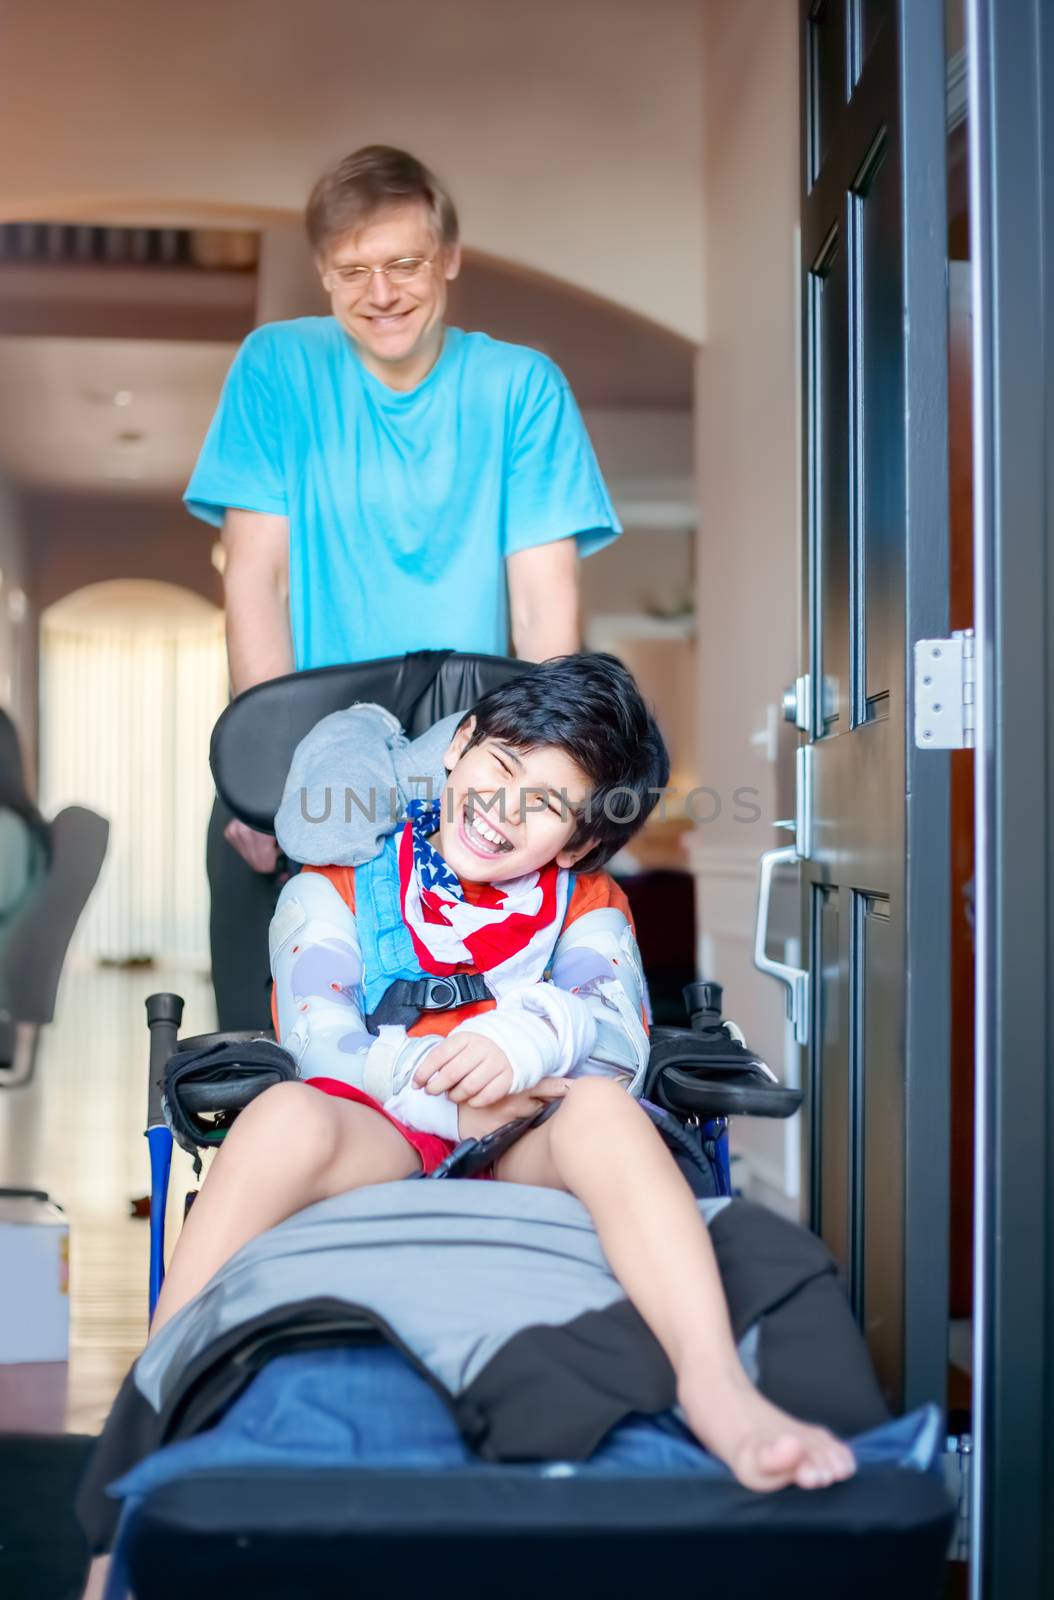 Father pushing disabled son in wheelchair out the front door by jarenwicklund